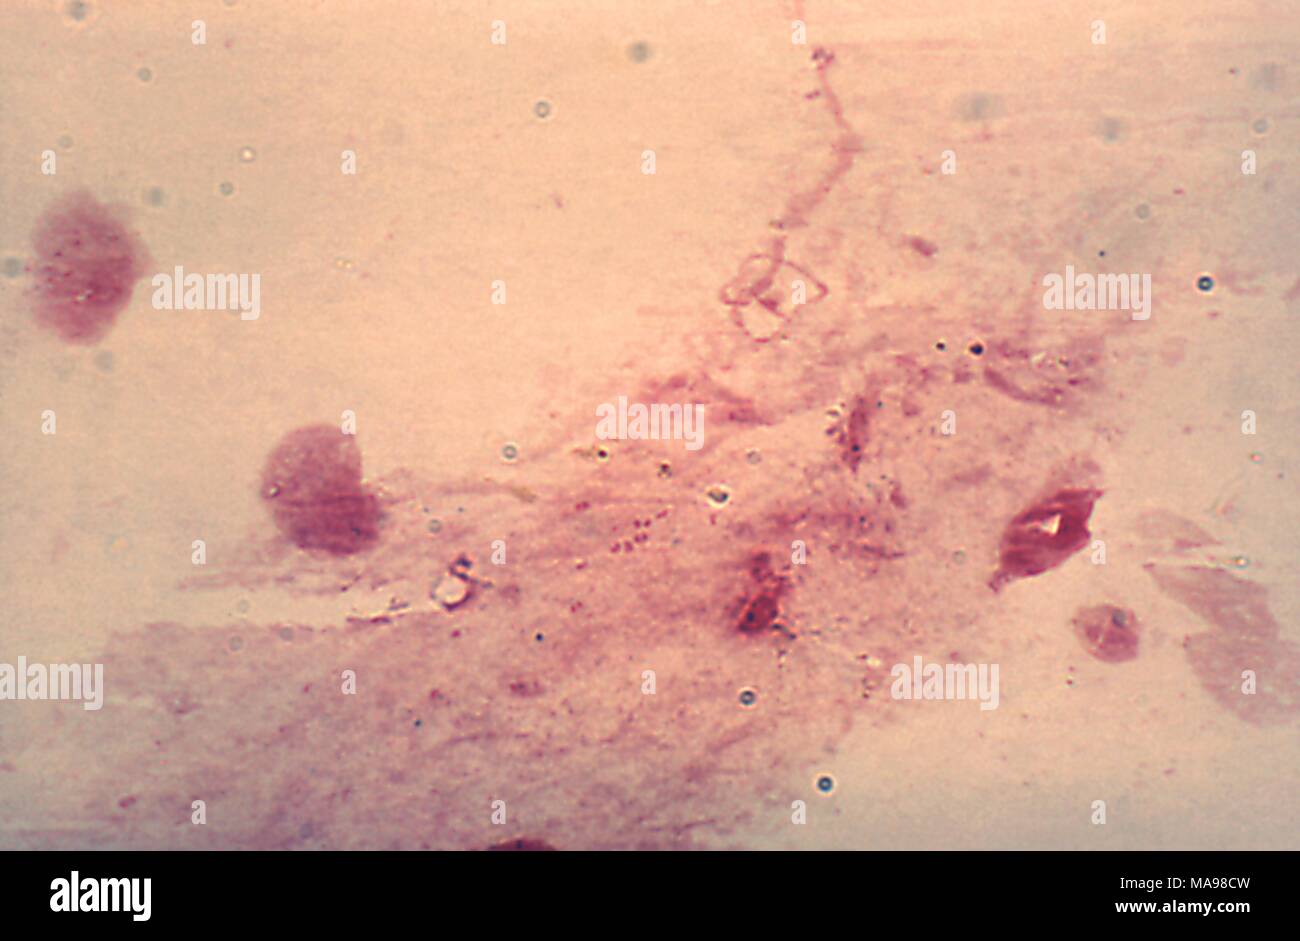 Neisseria gonorrhoeae bacteria revealed in the photomicrograph of the cervical smear, 1975. Image courtesy Centers for Disease Control (CDC) / Joe Miller. () Stock Photo